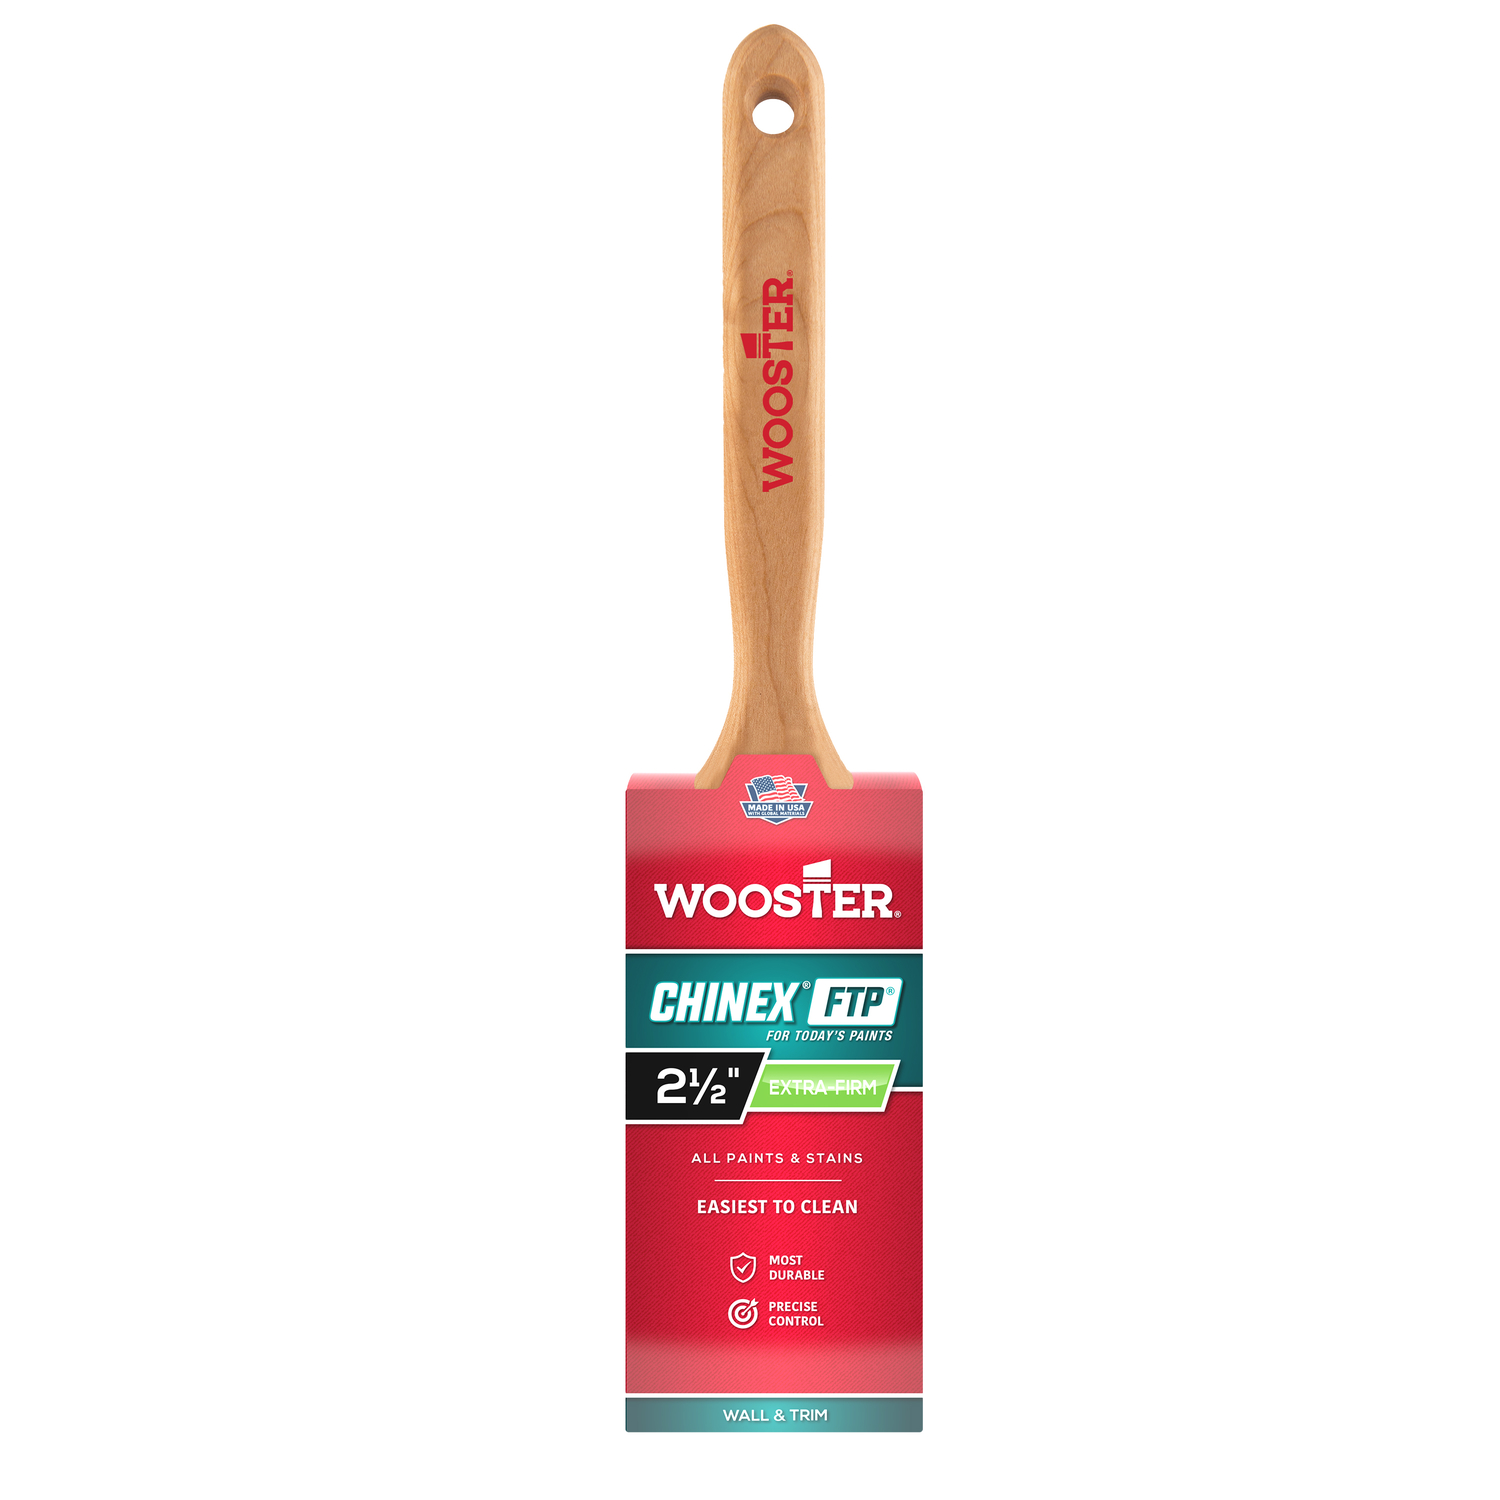 Photos - Putty Knife / Painting Tool Wooster Chinex FTP 2-1/2 in. Flat Paint Brush 4412-2 1/2